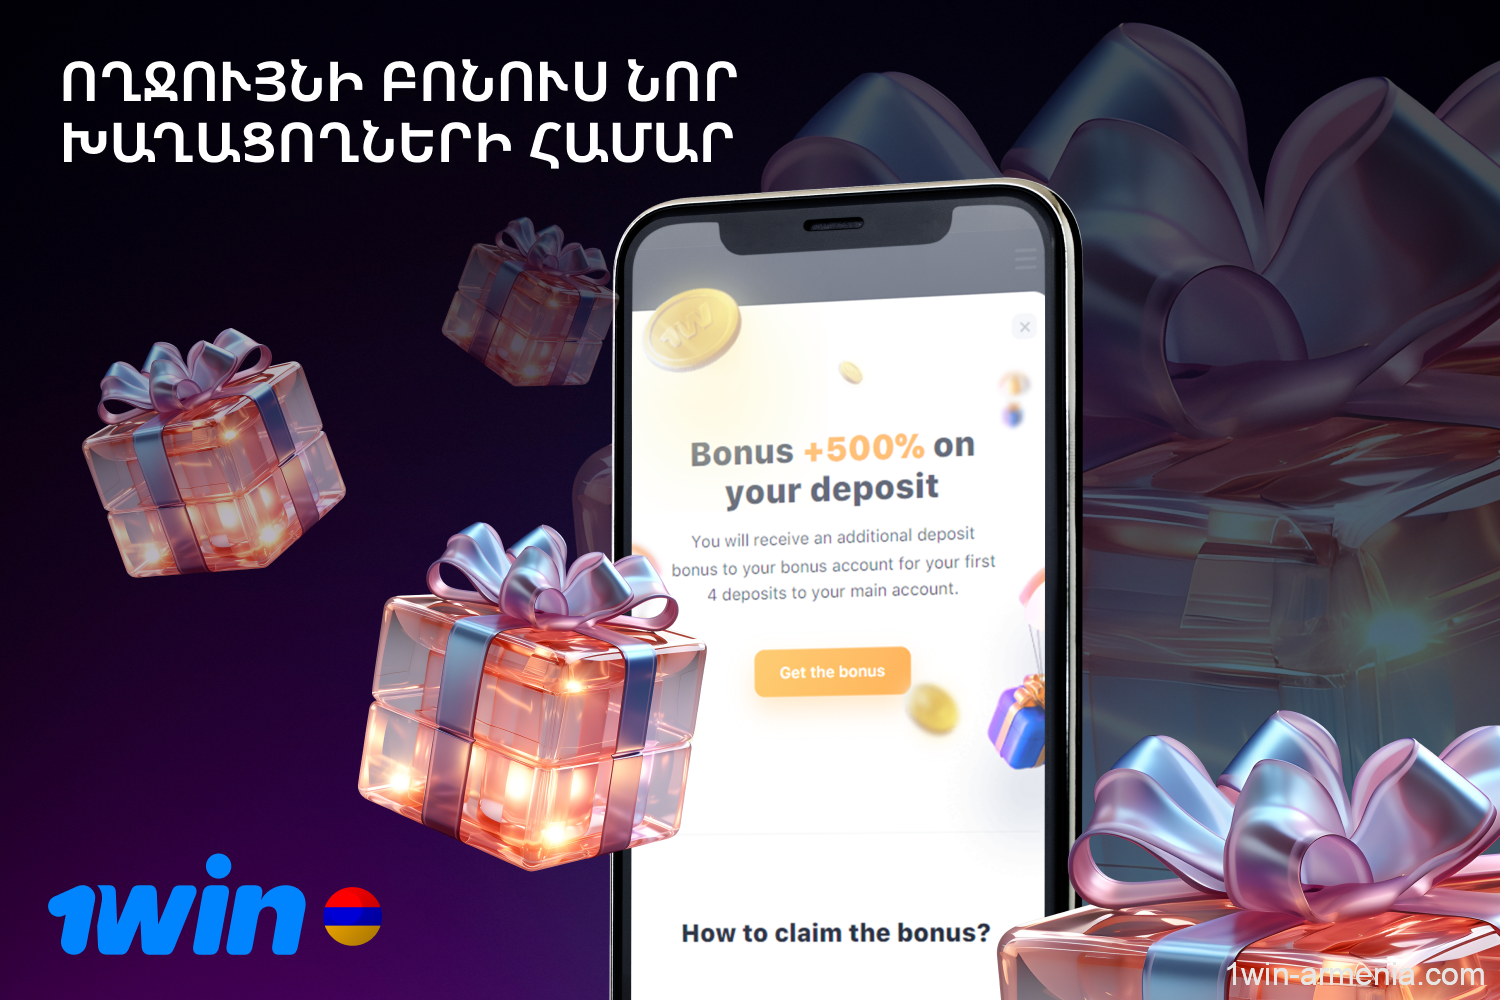 1win users from Armenia can get a welcome bonus after registration